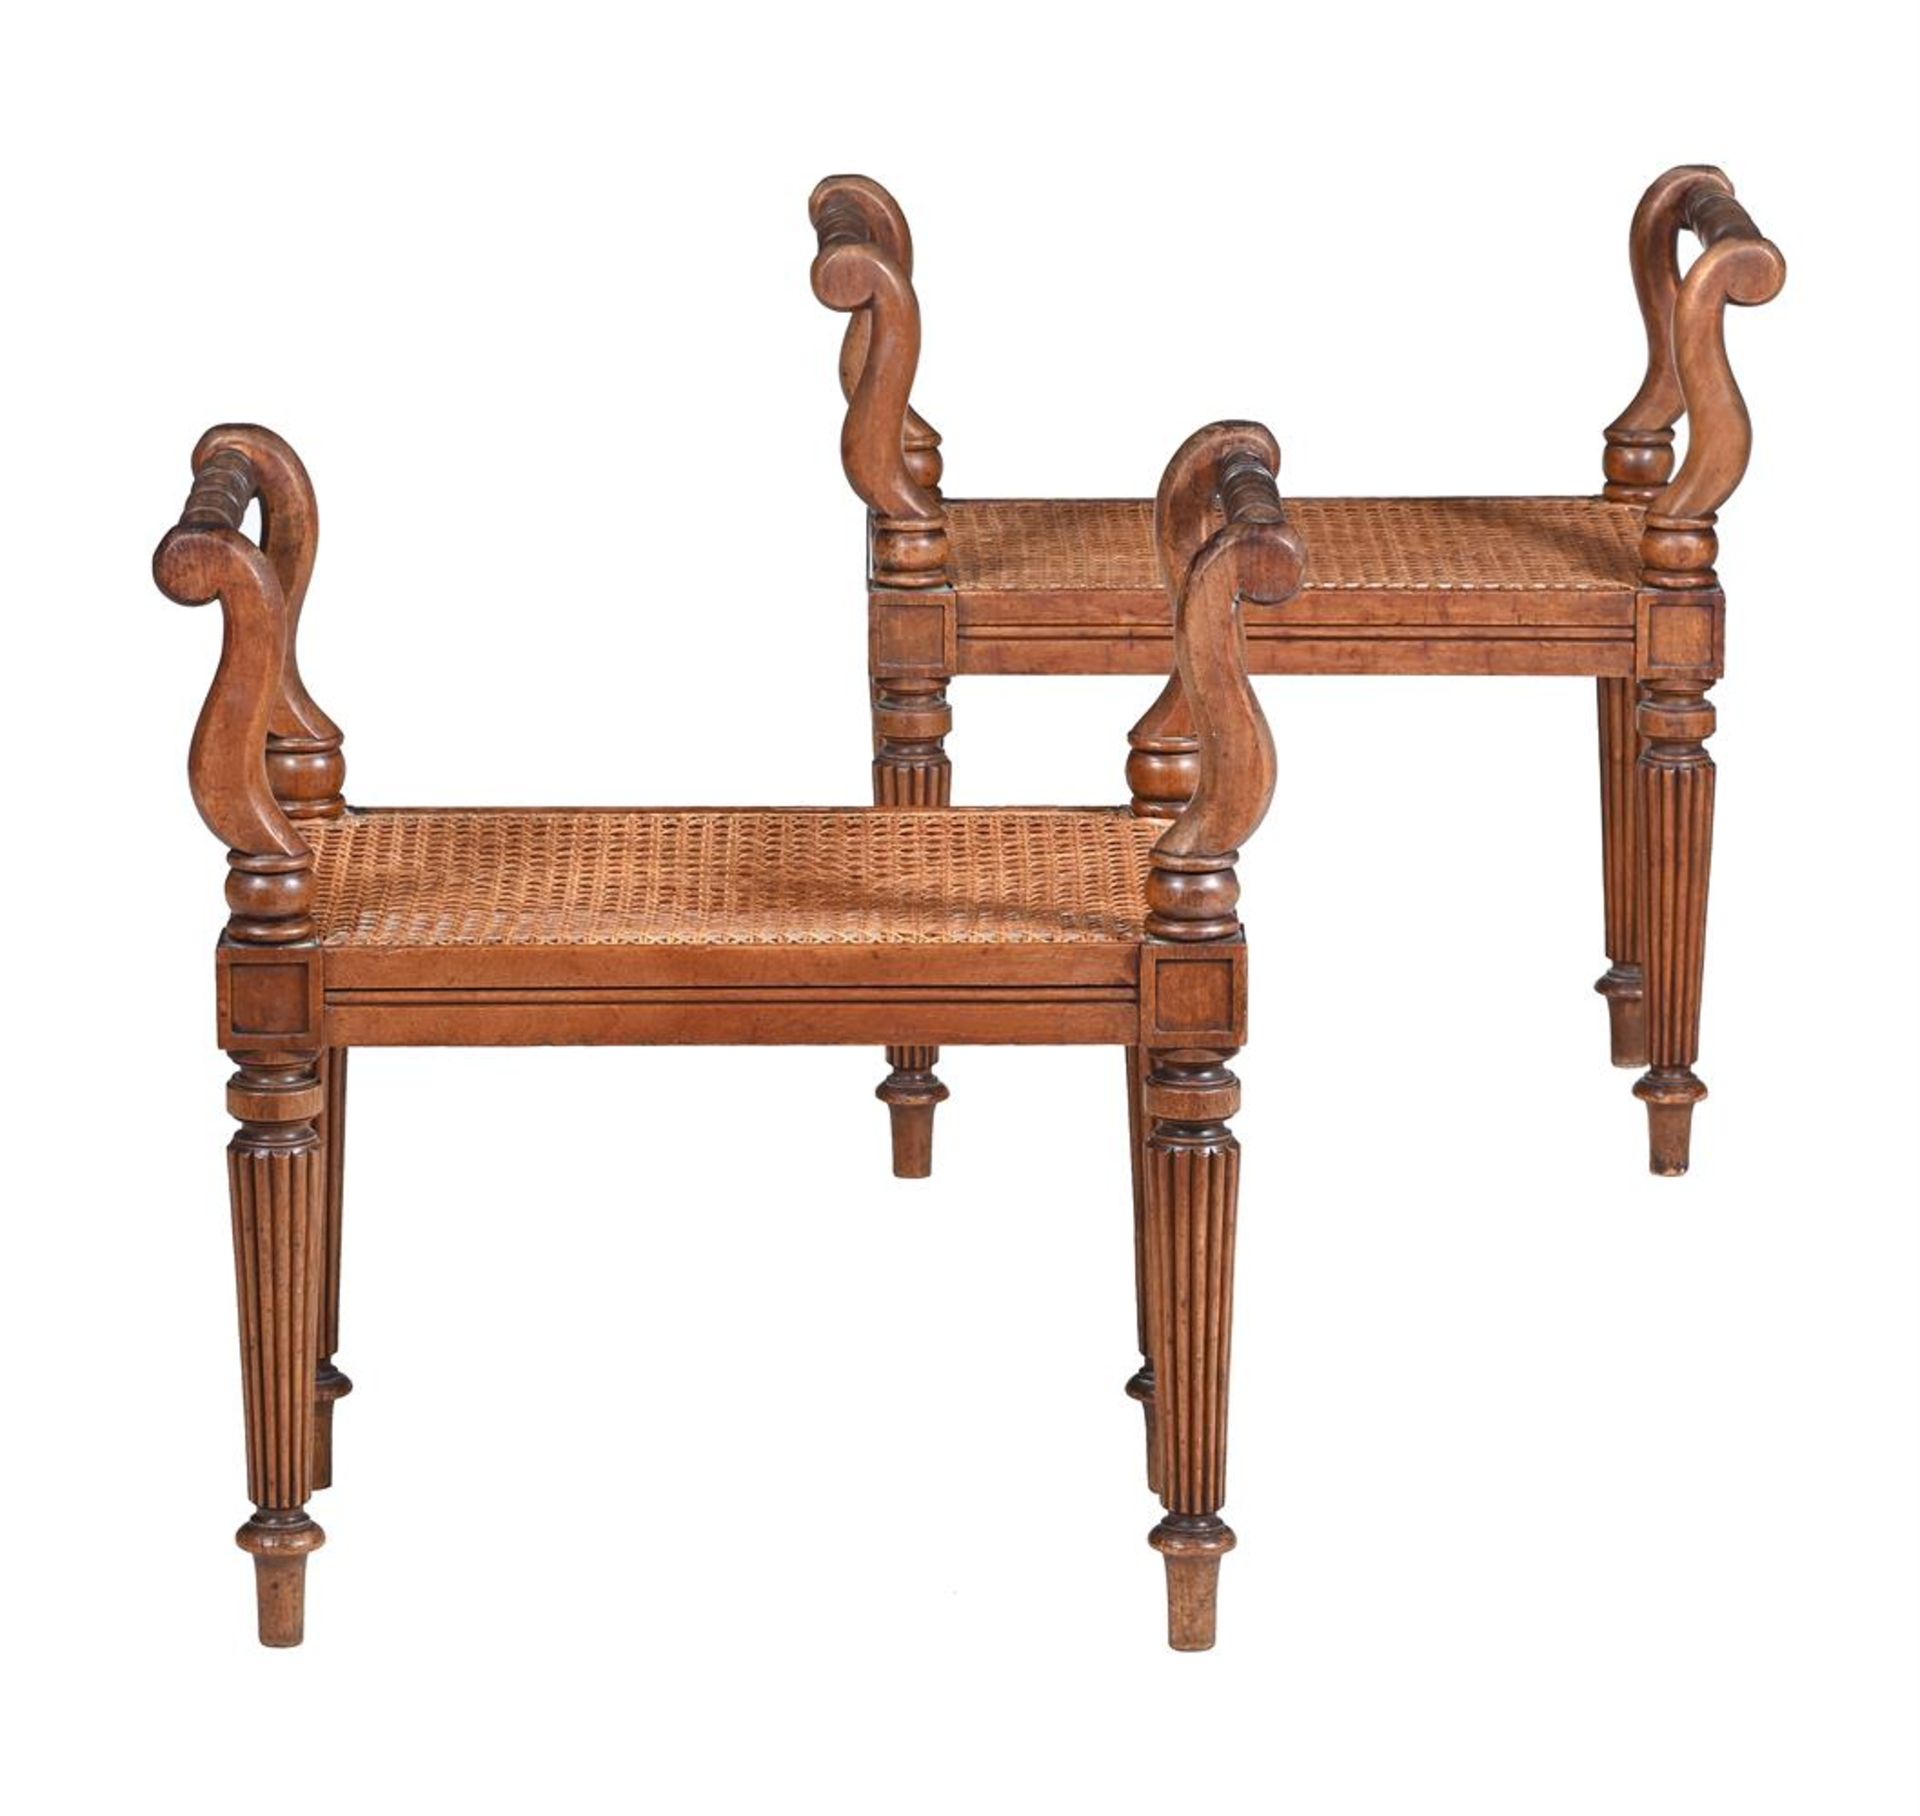 A PAIR OF GEORGE IV MAHOGANY WINDOW SEATS, IN THE MANNER OF GILLOWS - Image 2 of 2